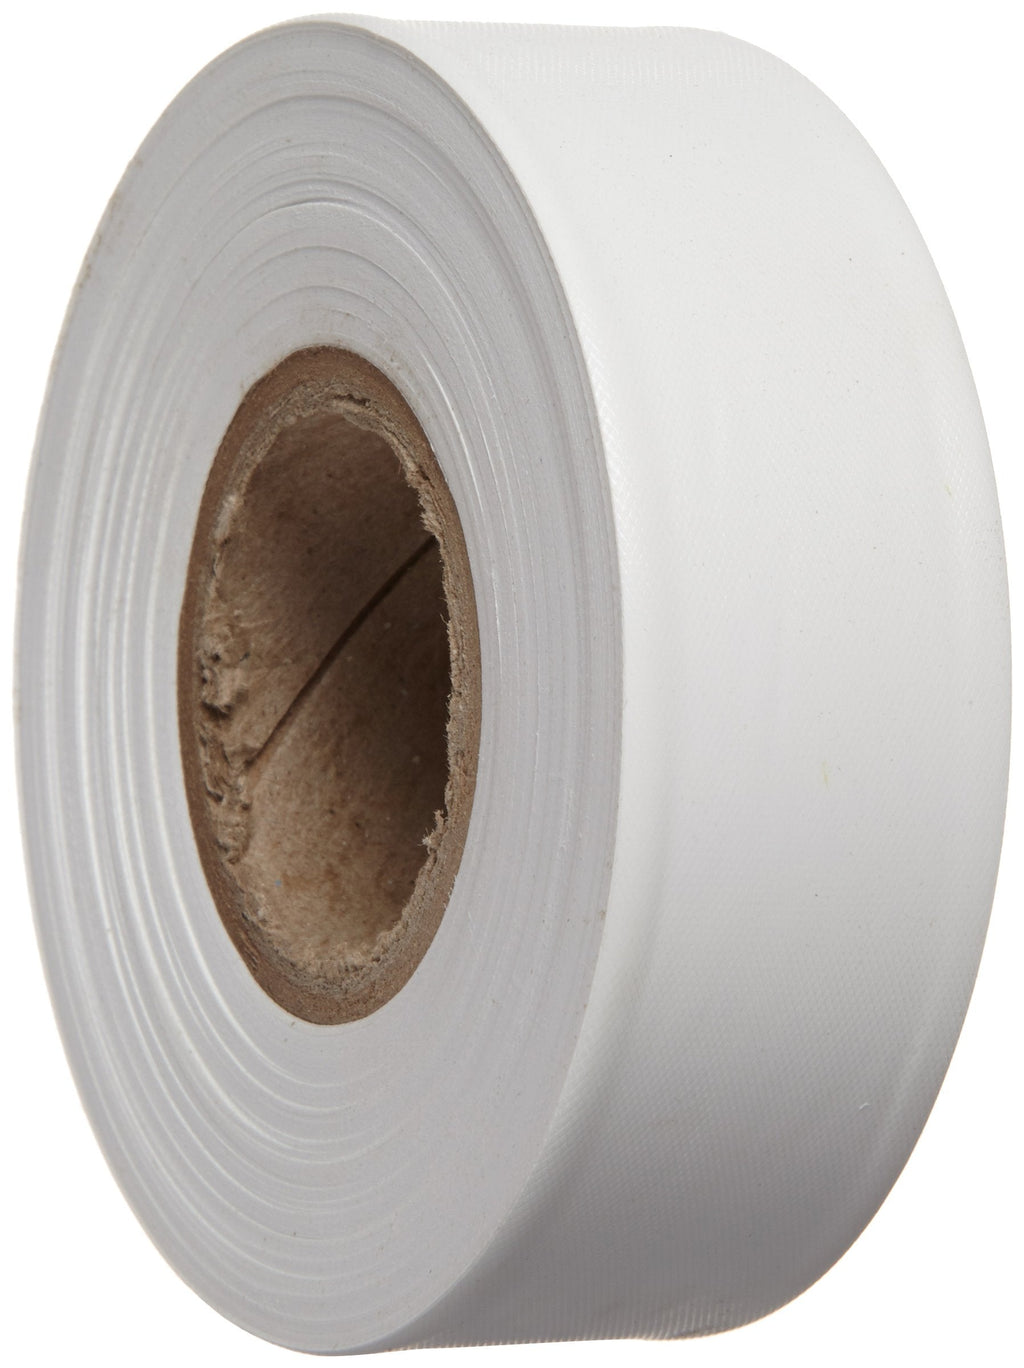  [AUSTRALIA] - Brady White Flagging Tape for Boundaries and Hazardous Areas - Non-Adhesive Tape, 1.188" Width, 300' Length (Pack of 1) - 58342